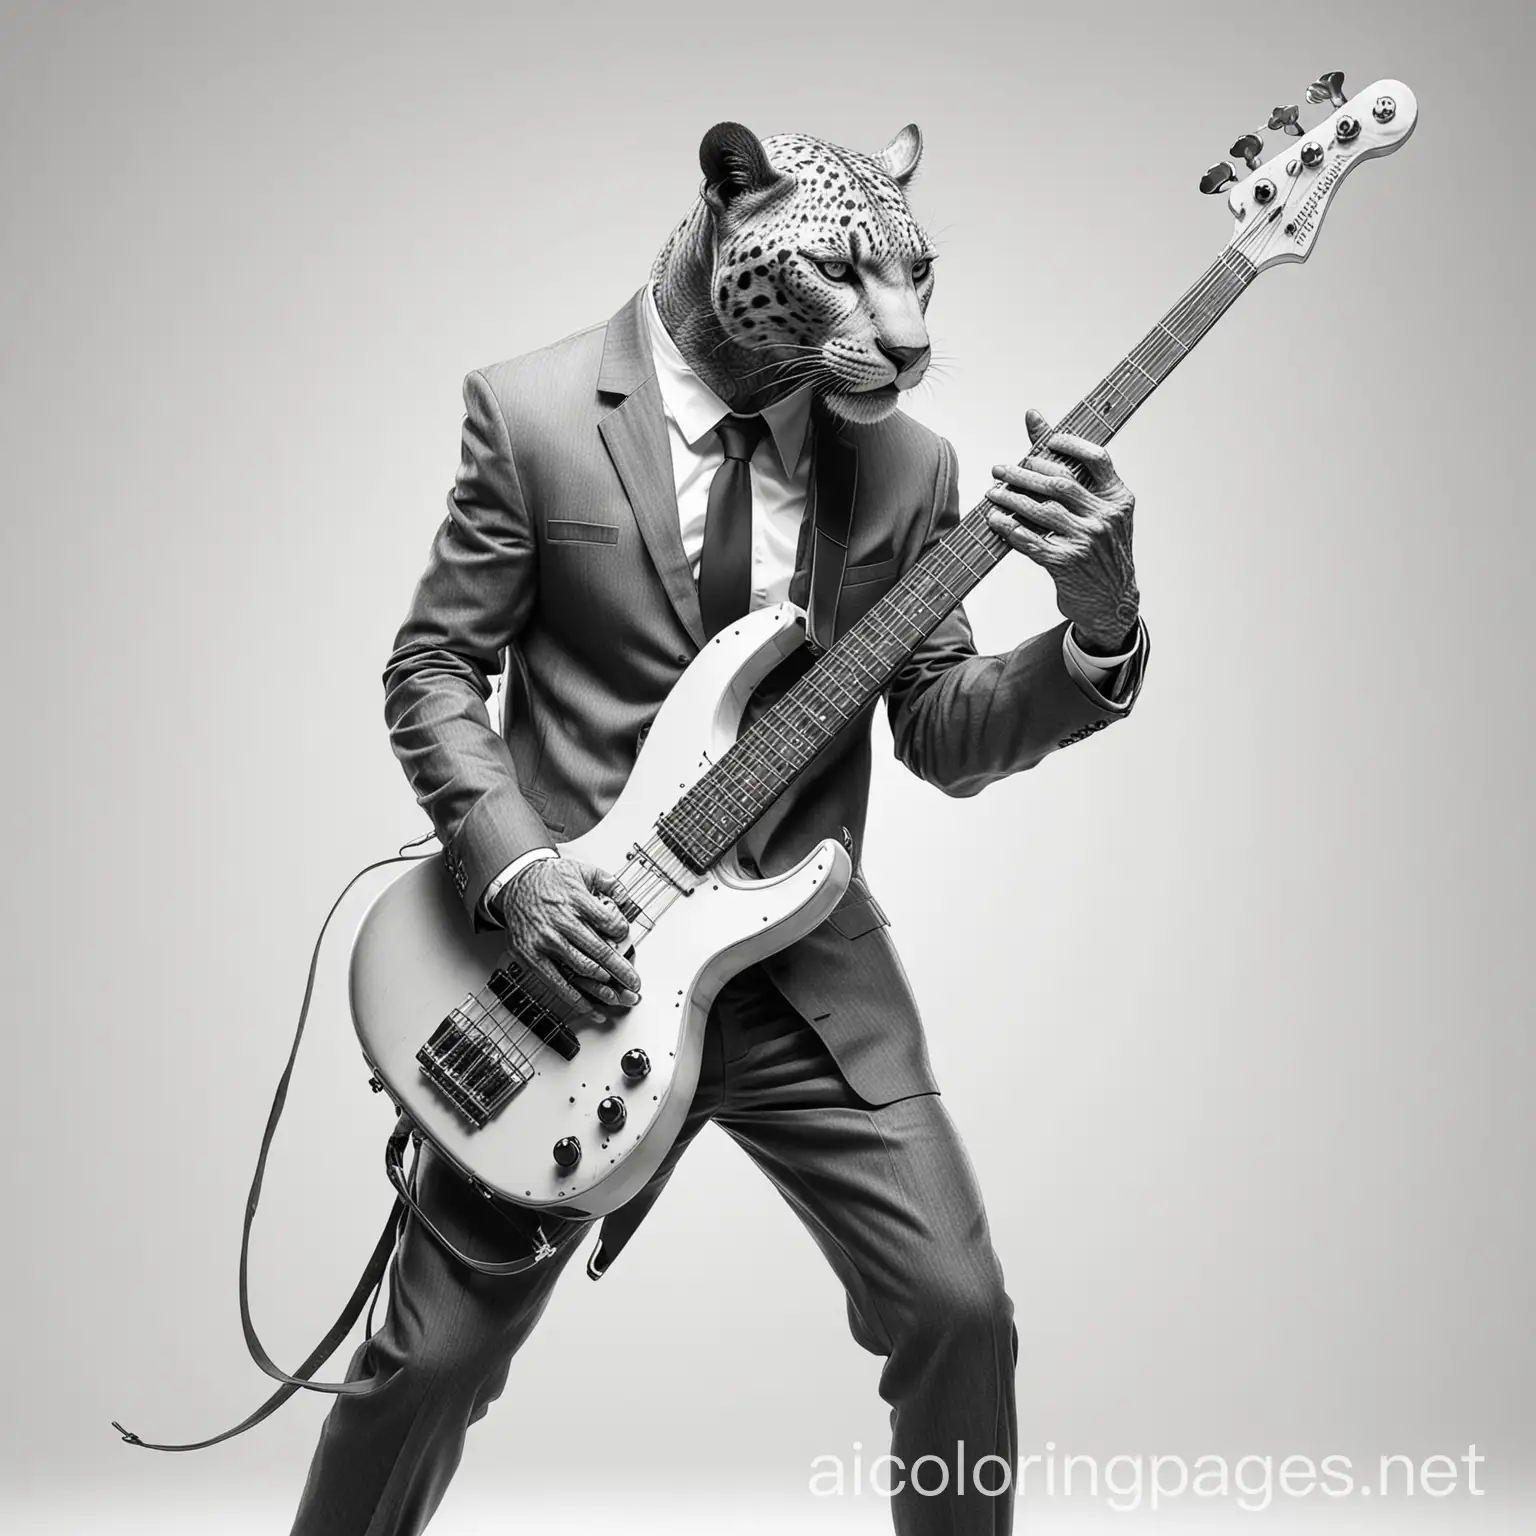 panther person in a suit playing a bass guitar, Coloring Page, black and white, line art, white background, Simplicity, Ample White Space